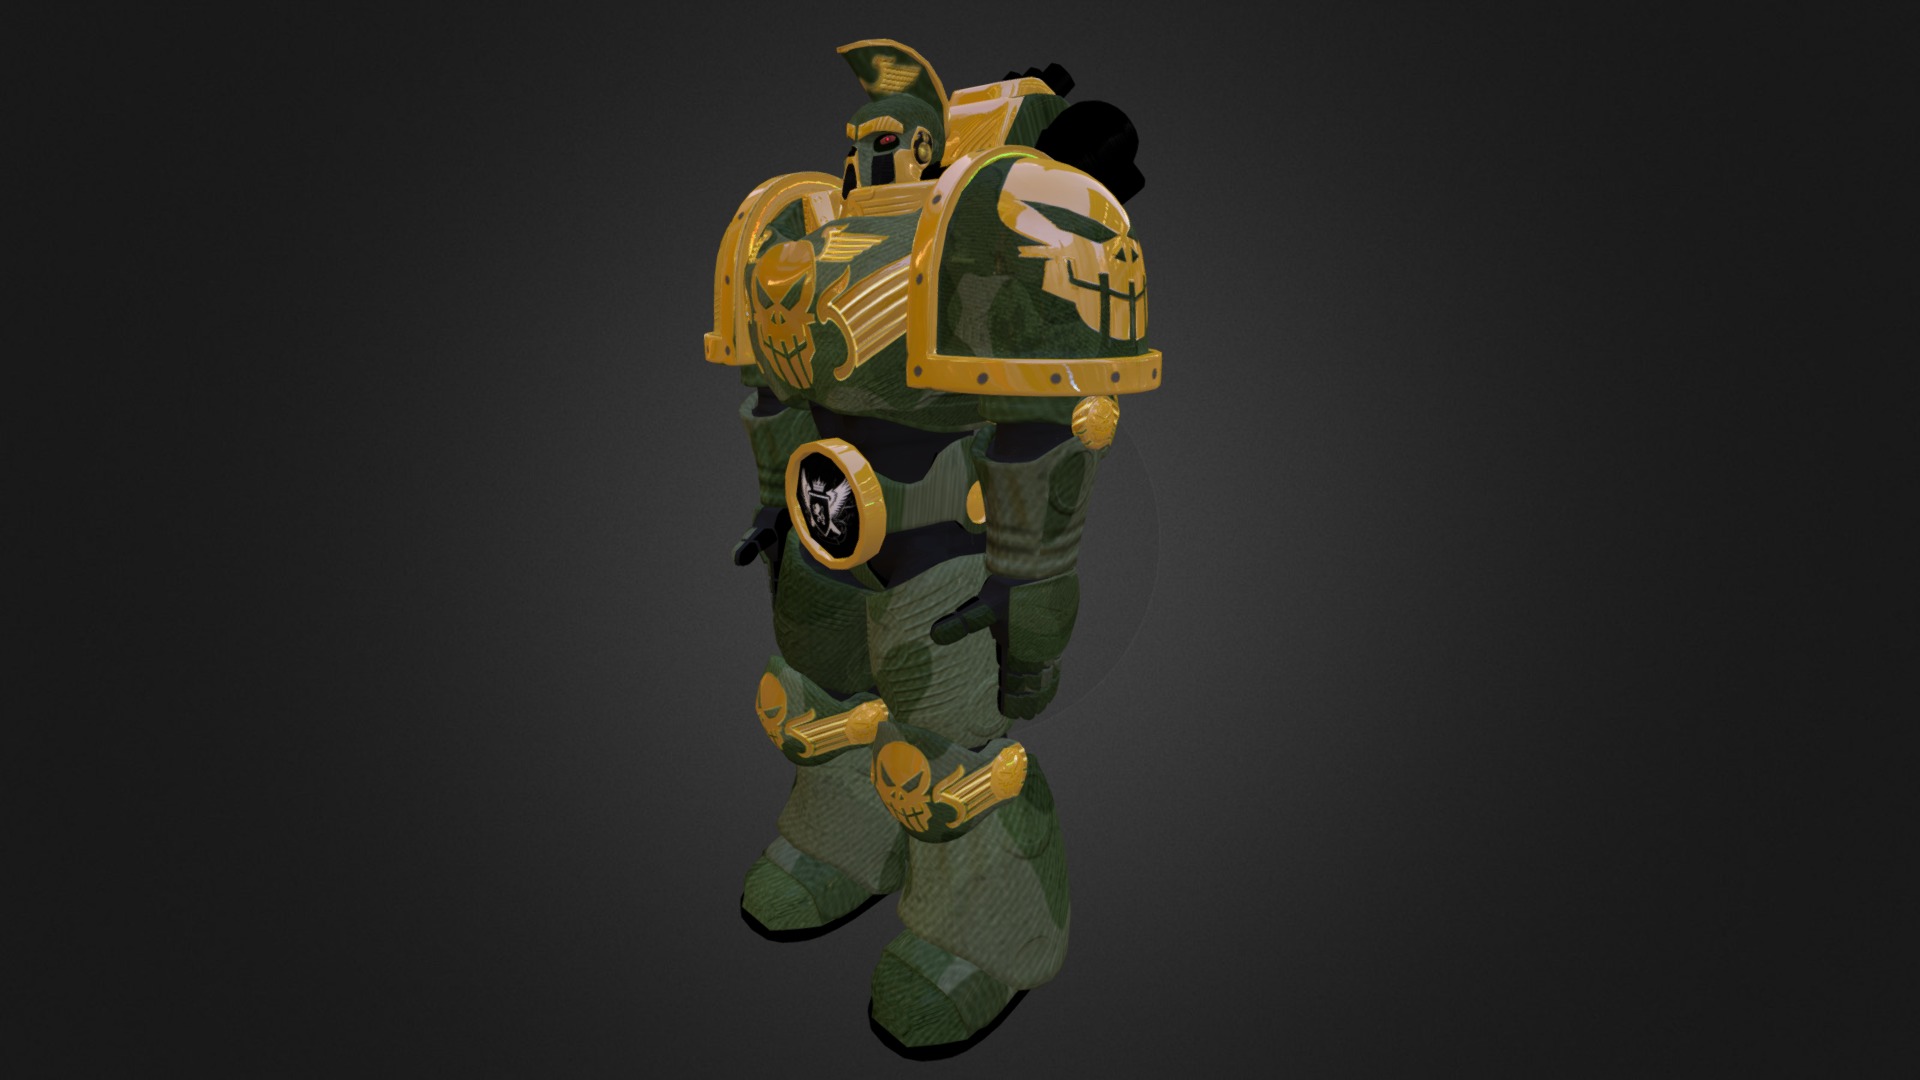 This is my Warhammer 40k Marines.

I call them the Spartan Marines. 

I will make a new texture that will look more like Spartan 3d model